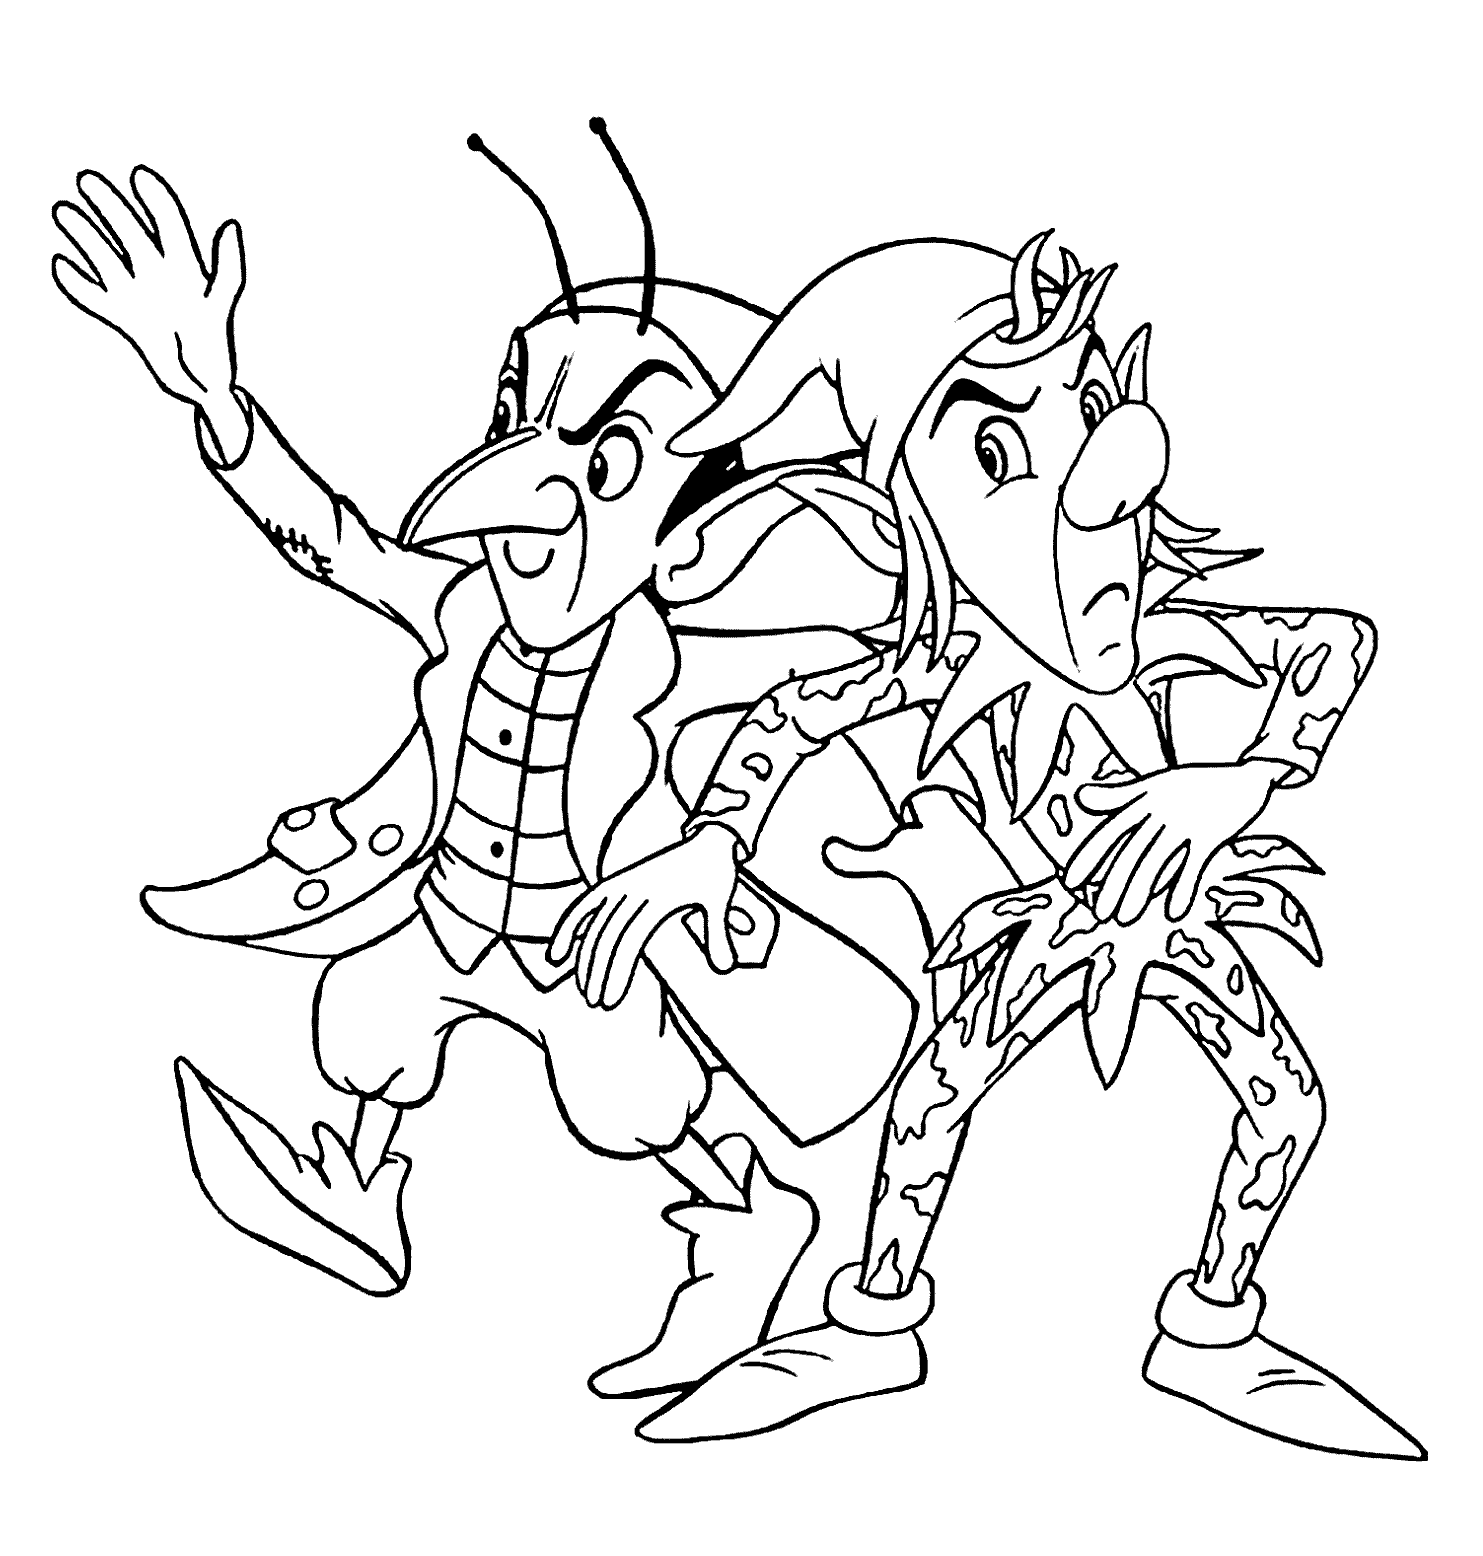 Green Goblin - Free Colouring Pages